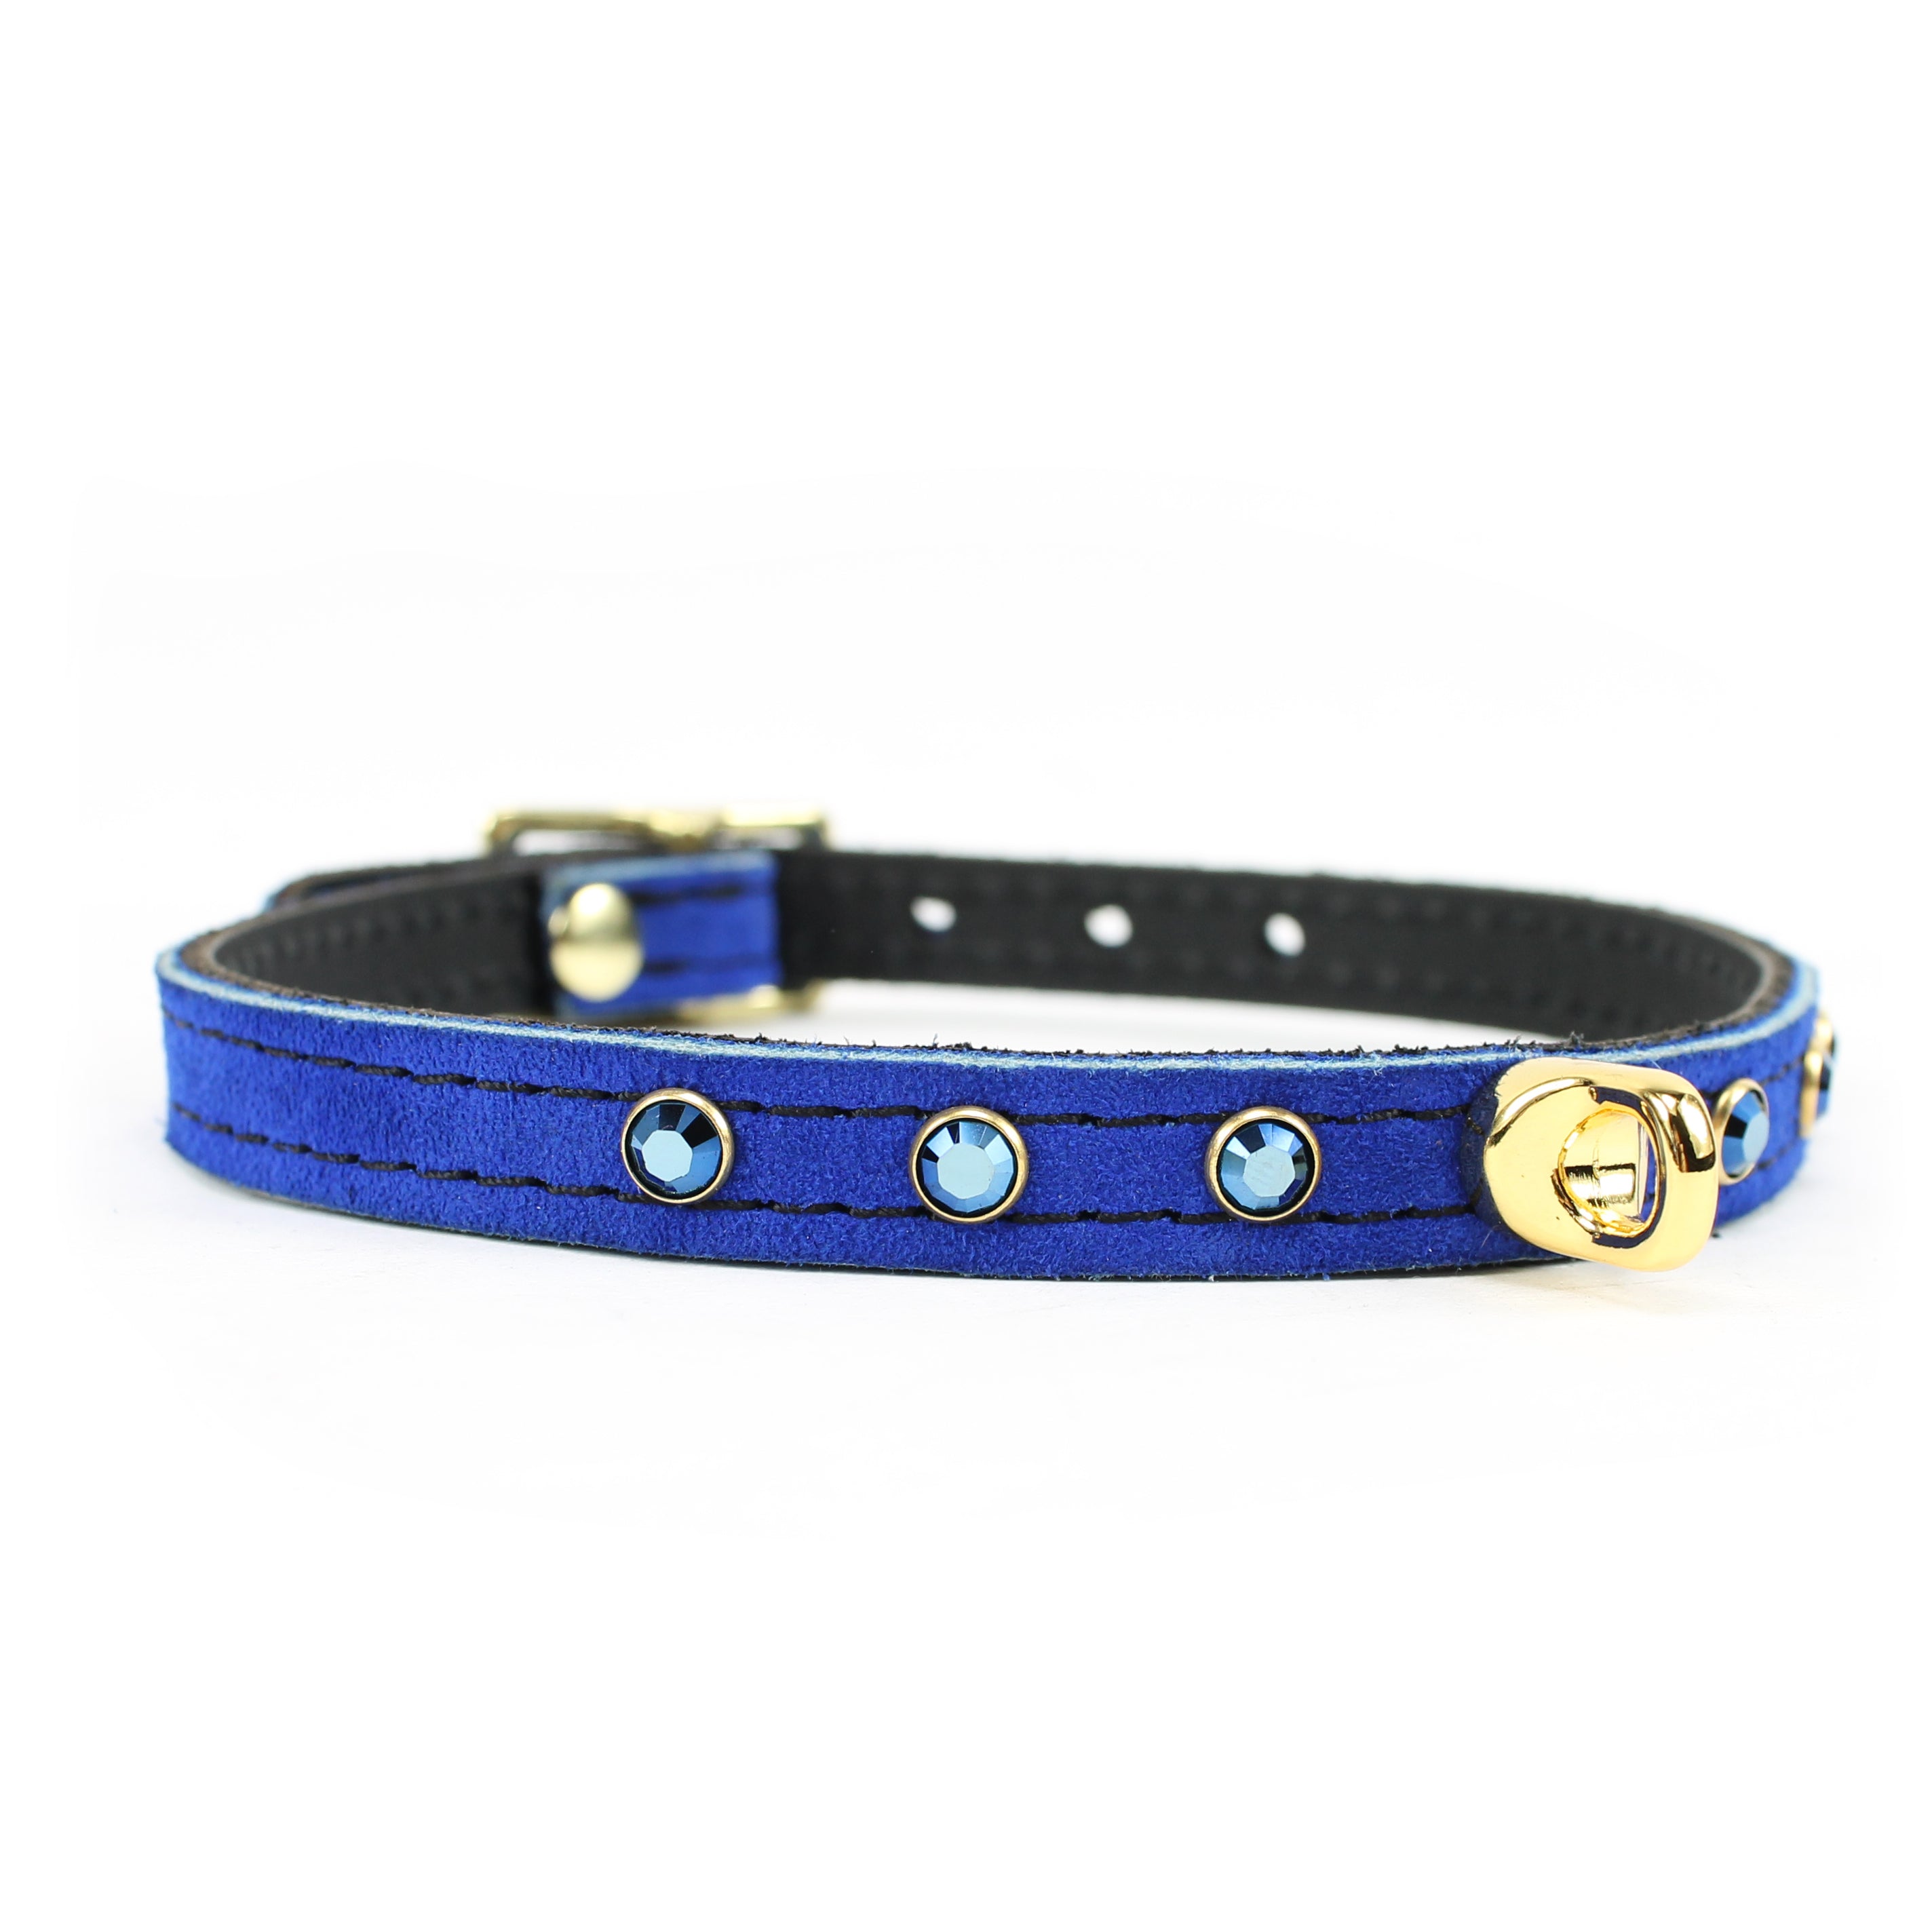 Luxury princess DDLG day collar suede blue gold